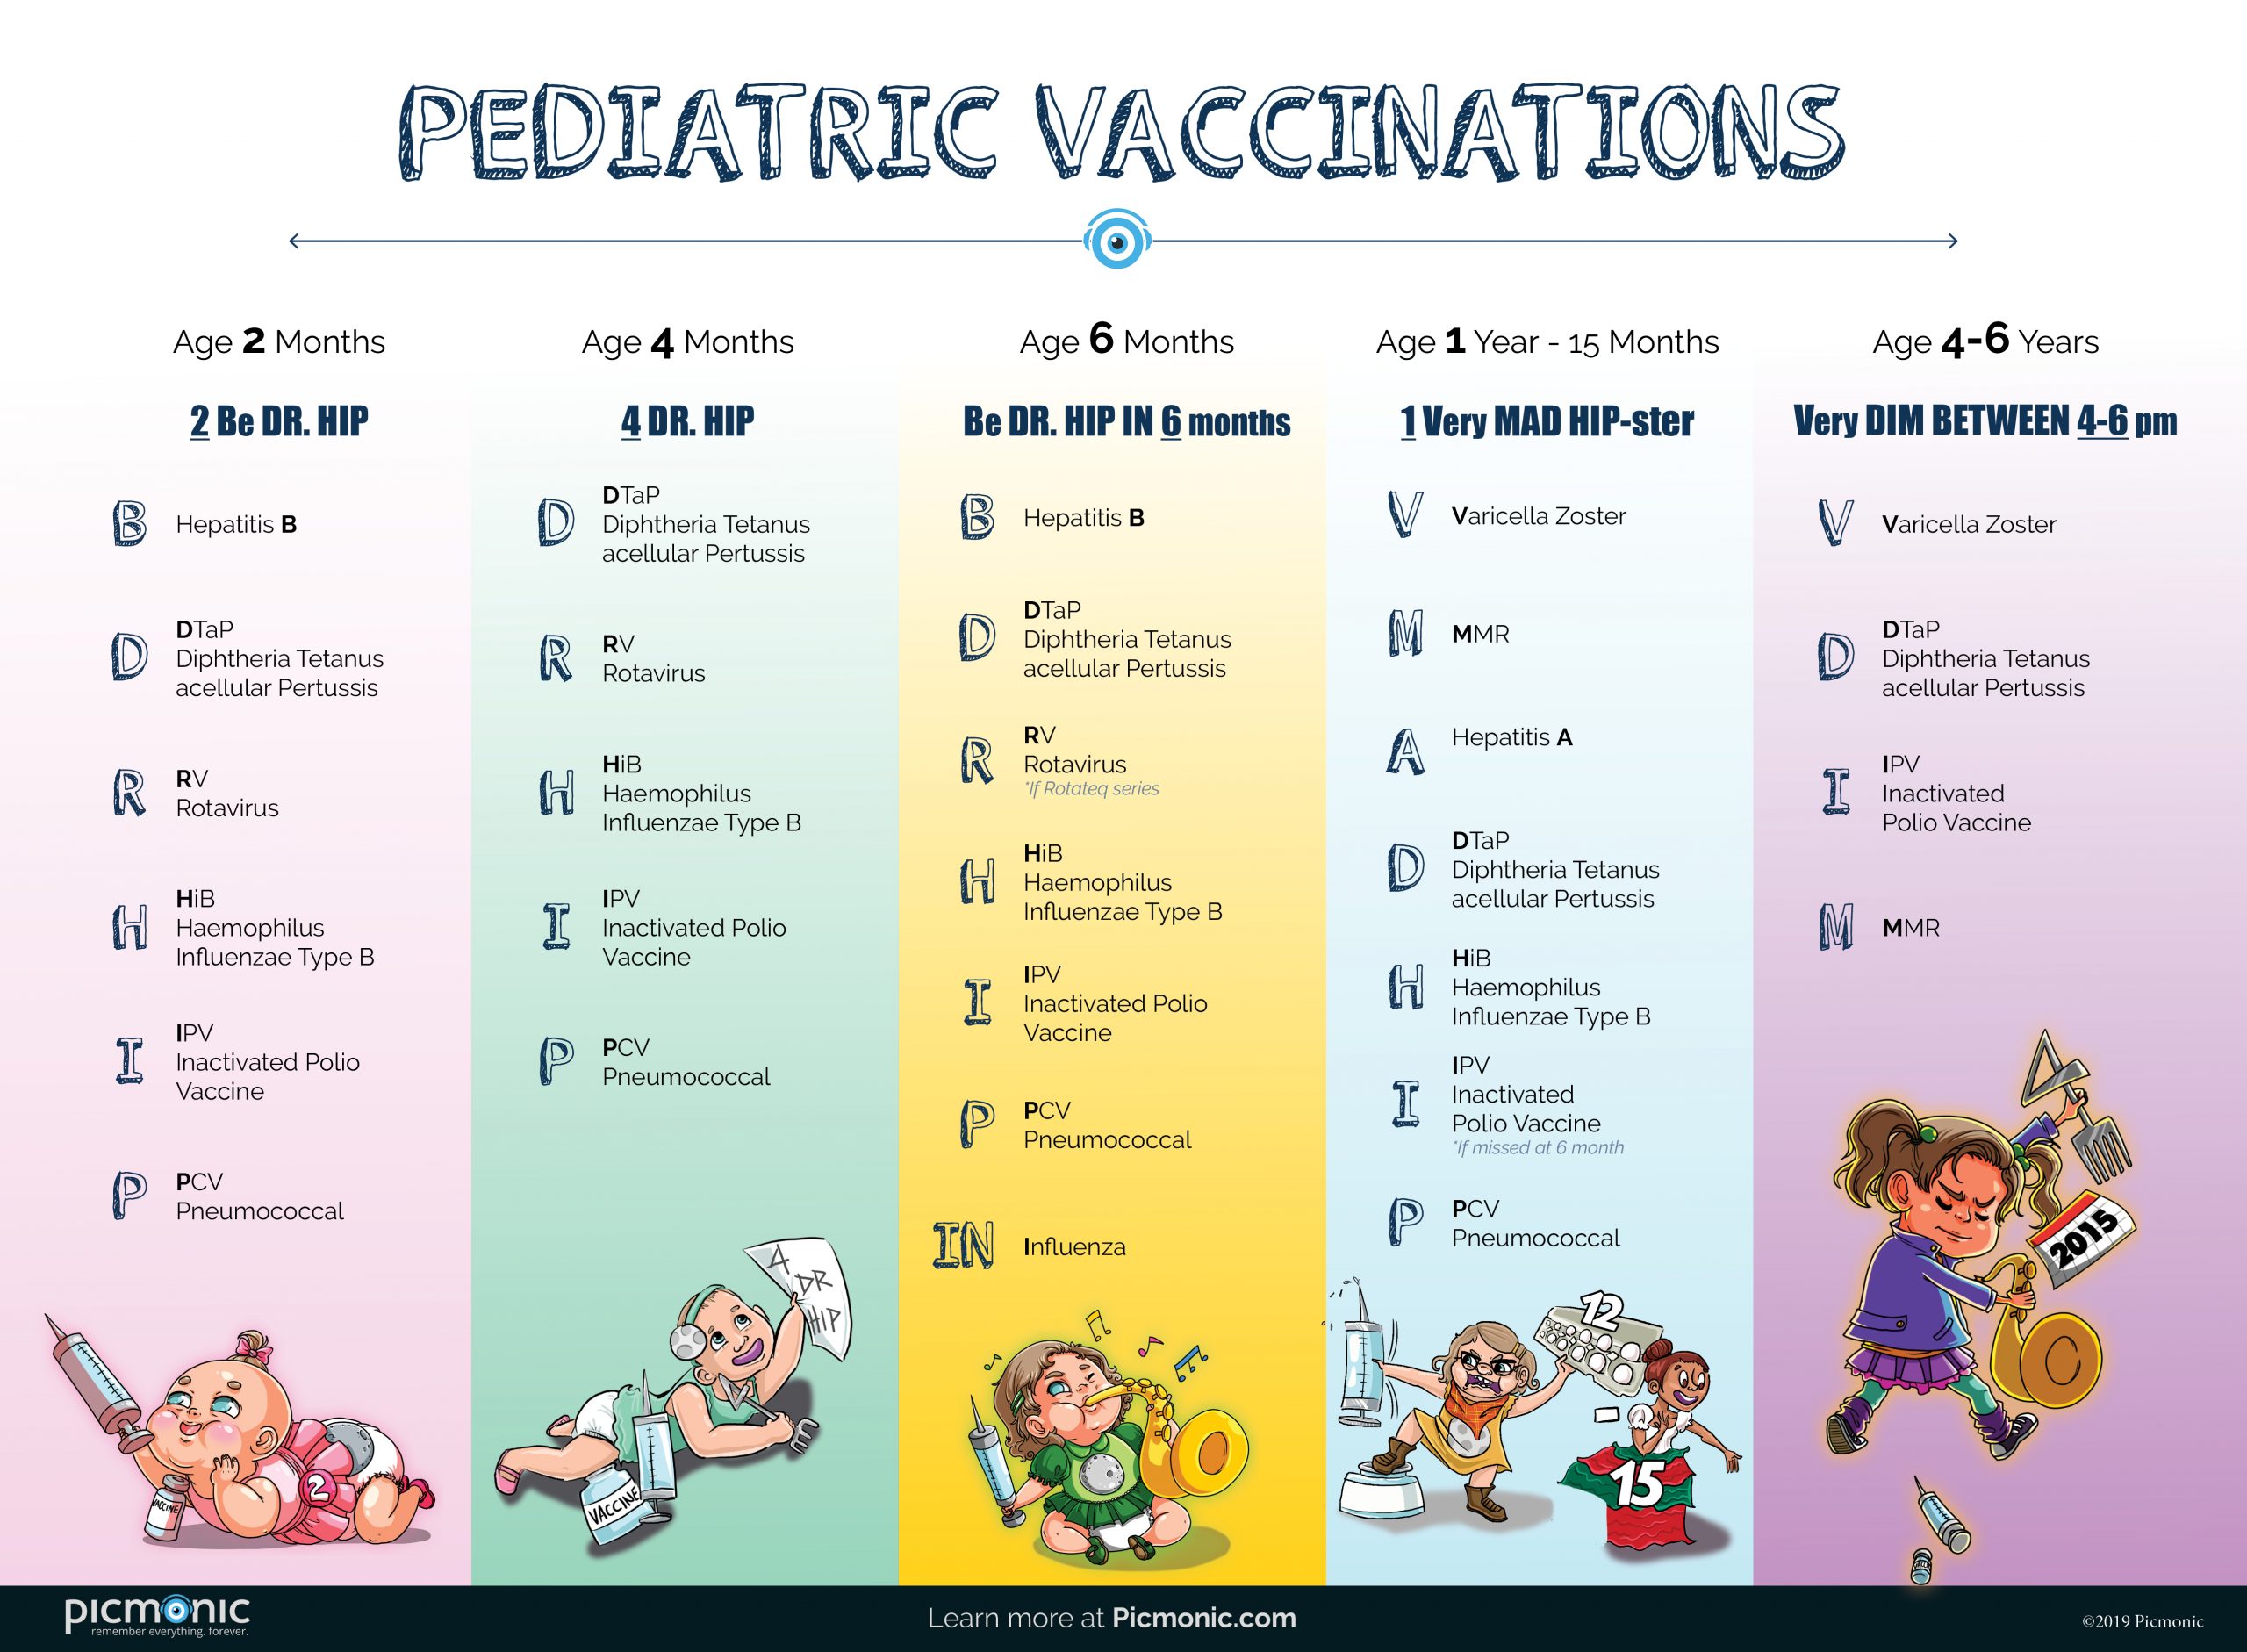 travel vaccinations for 1 year old